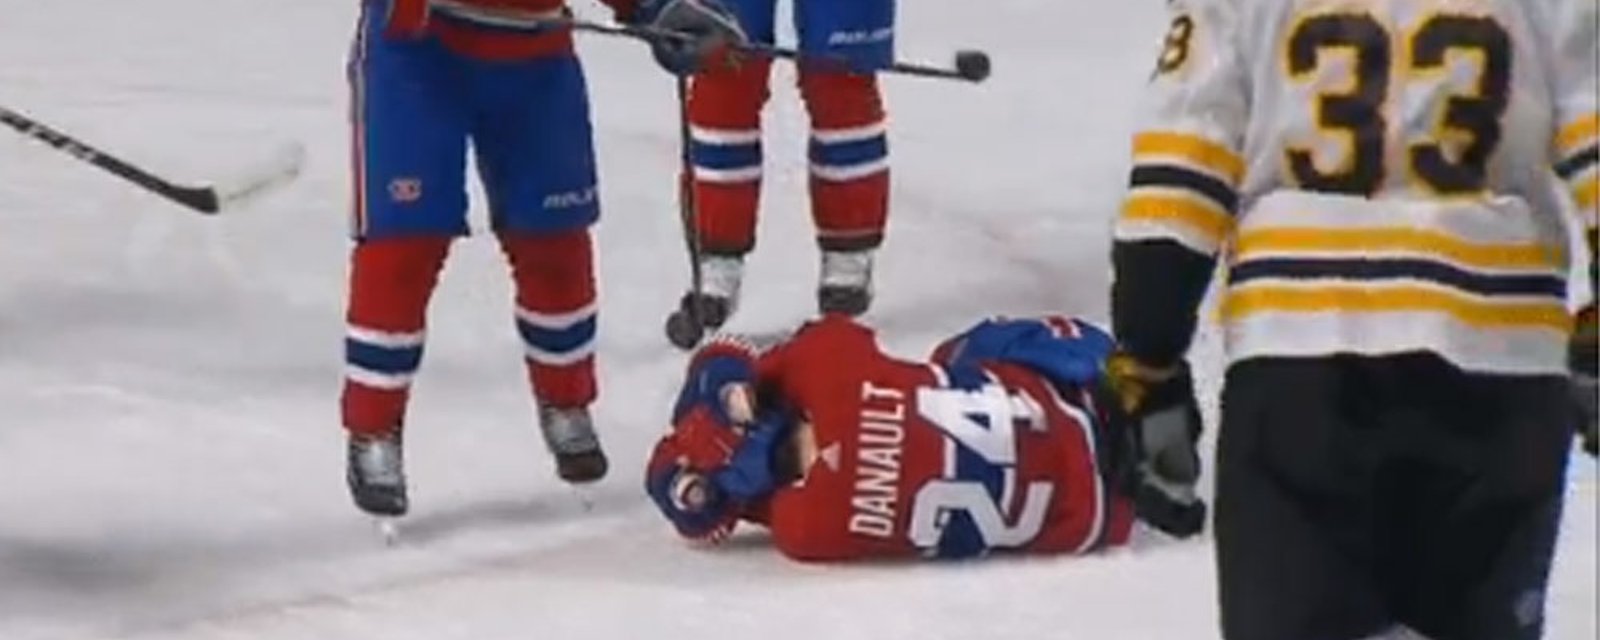 BREAKING: Crucial update on Habs' forward who took a Zdeno Chara slapshot to the head